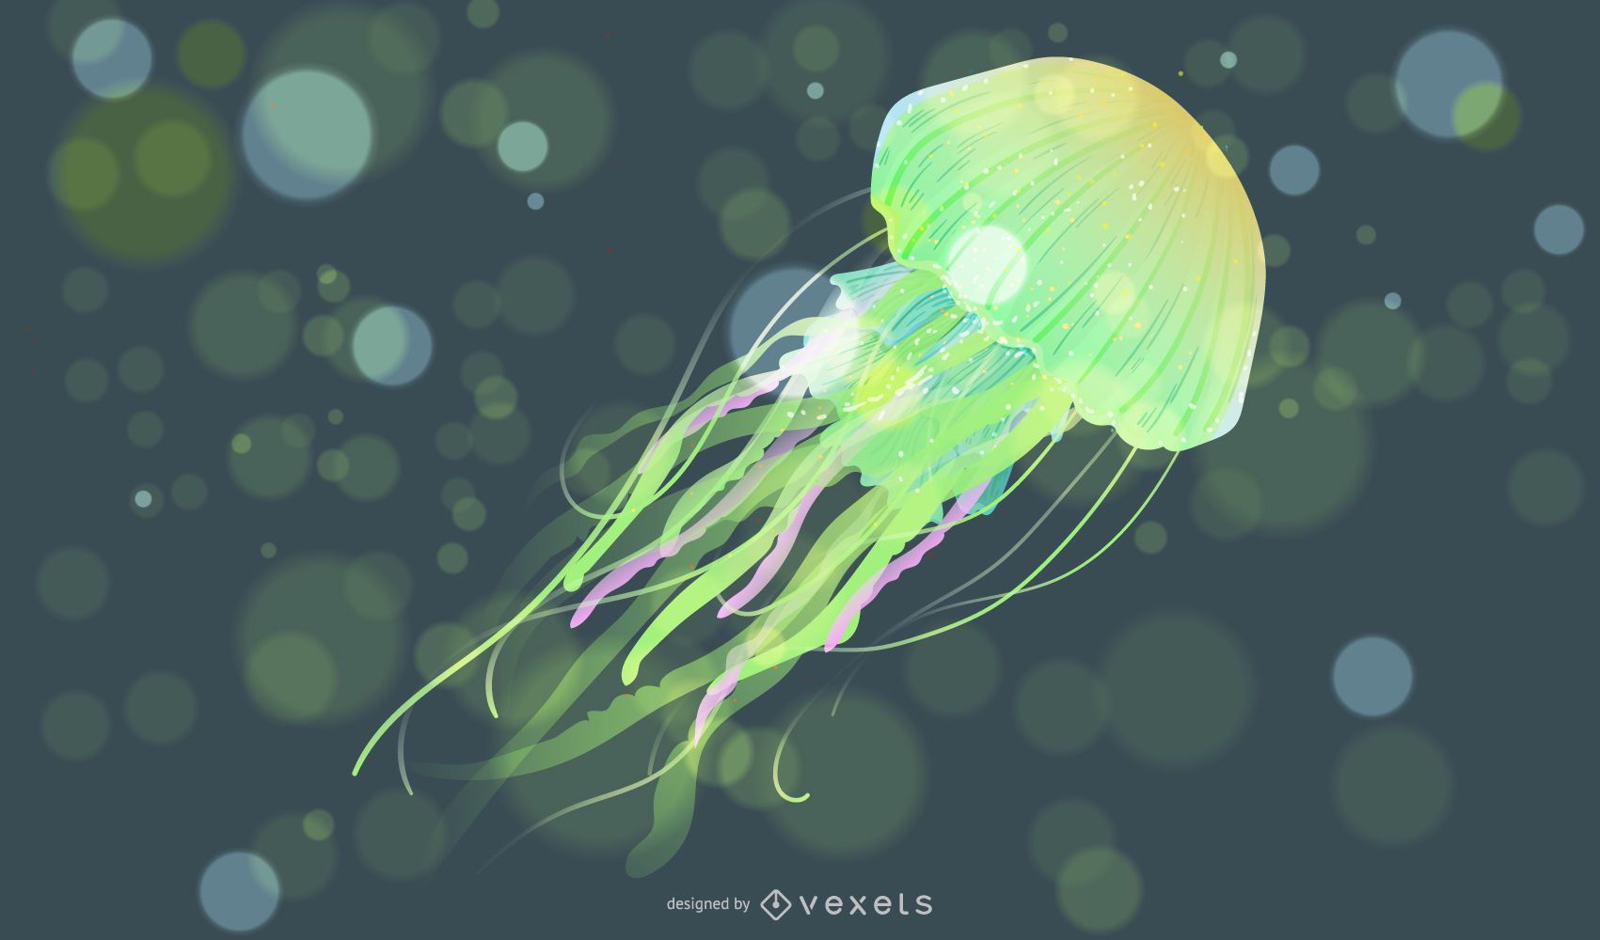 Illustrated jellyfish in green